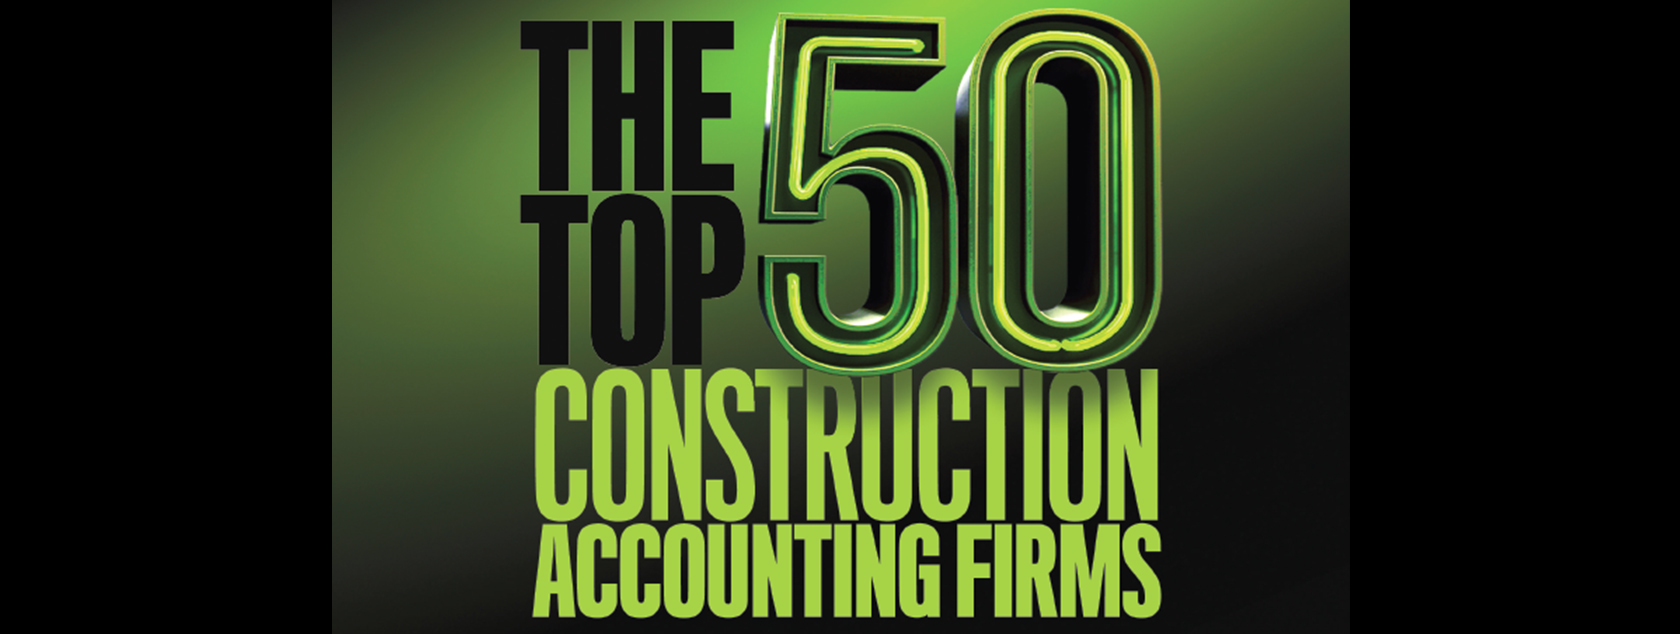 The Top 50 Construction Accounting Firms logo.